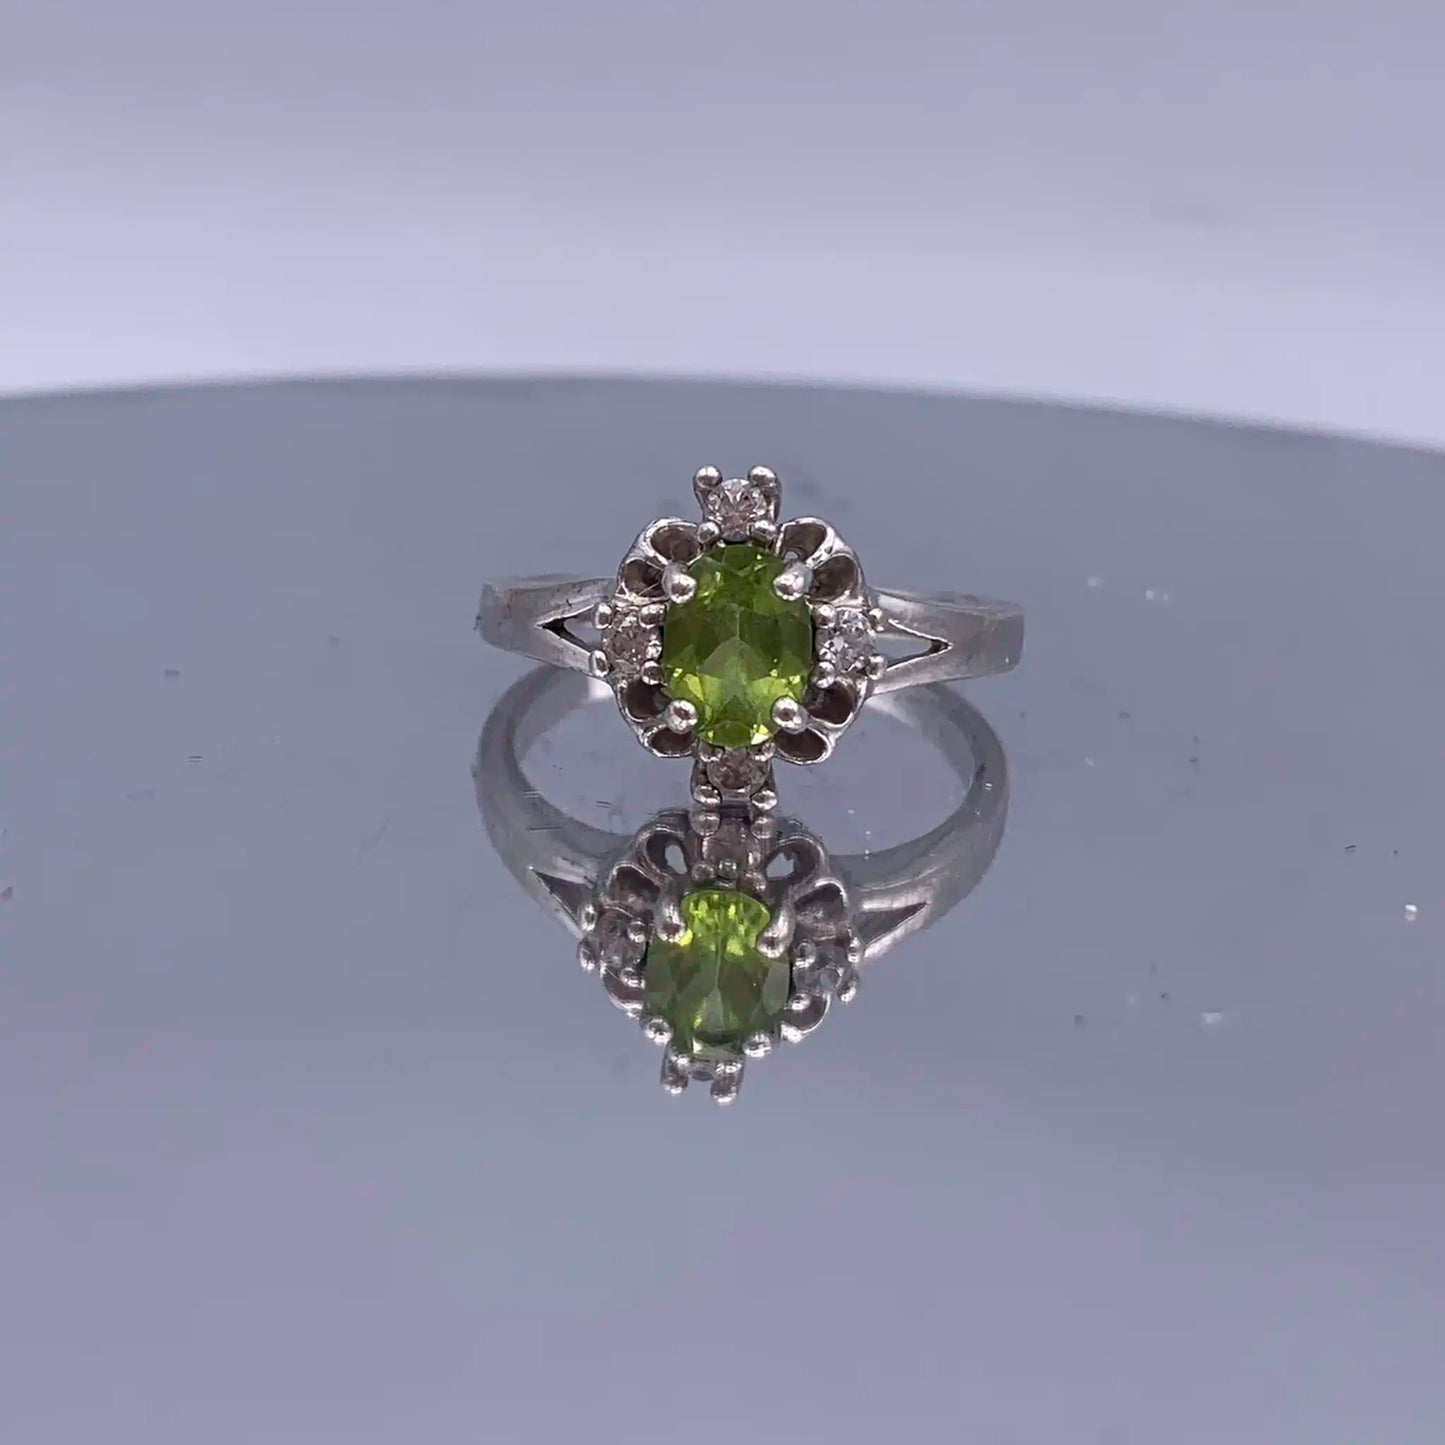 Vintage Sterling-Silver Peridot Ring Size 4.5 - Hand-Me-Diamonds